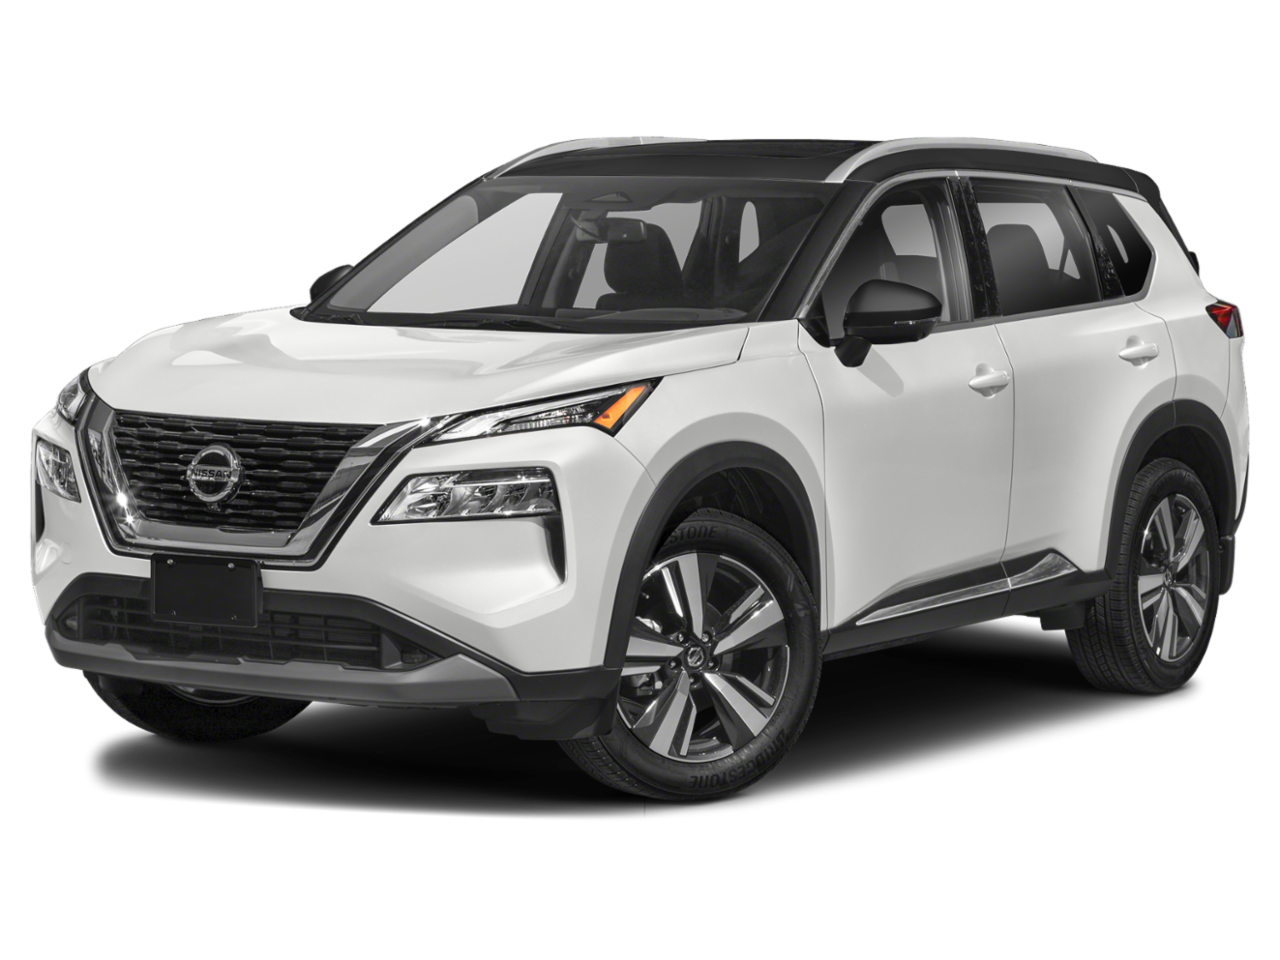 New 2023 Nissan Rogue Specials And Lease Deals In Bourbonnais At Hove Nissan